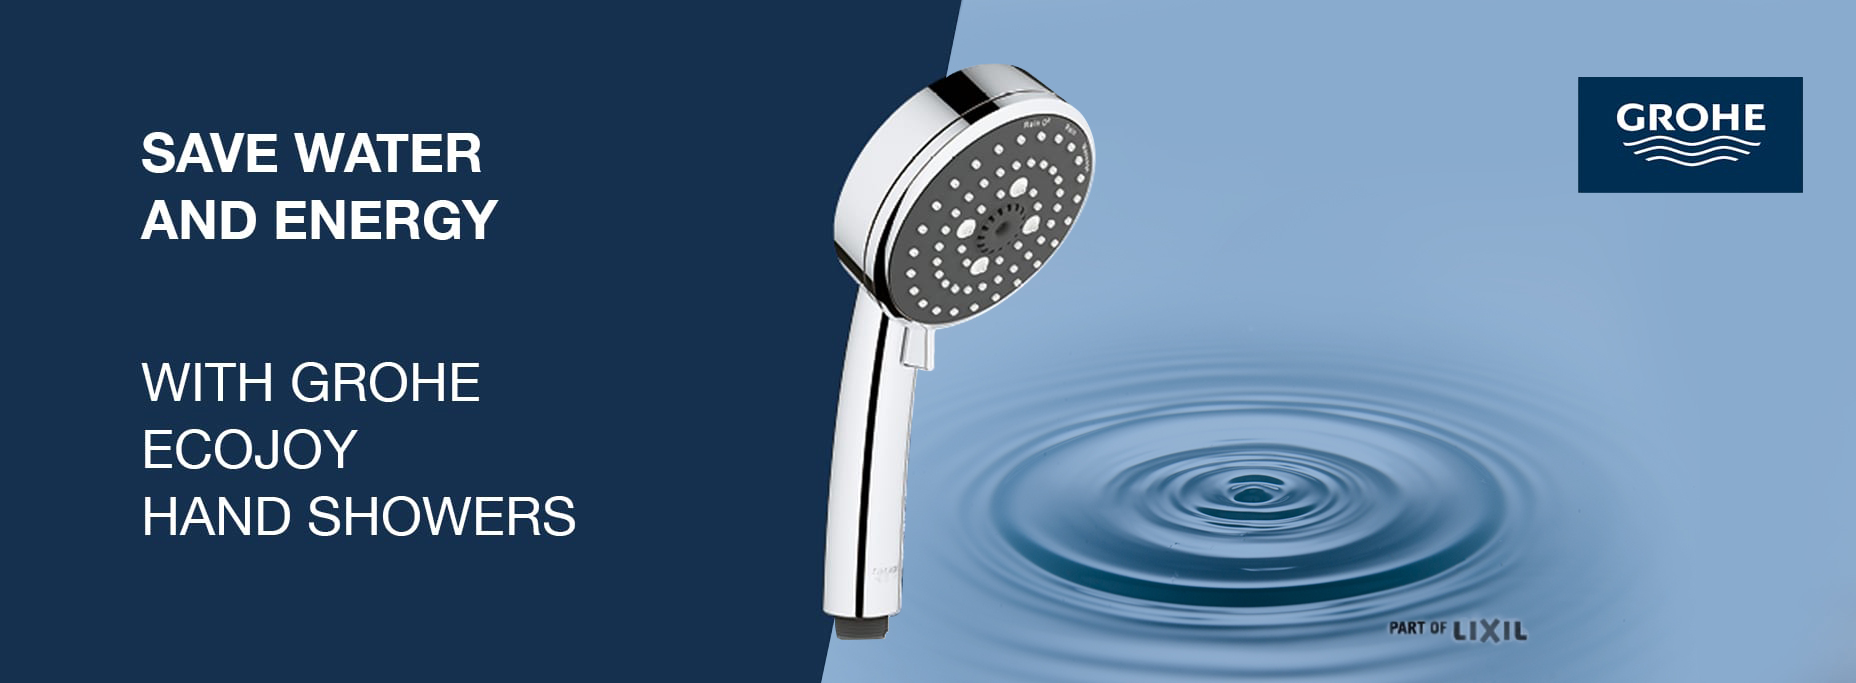  GROHE Handshowers at xTWO